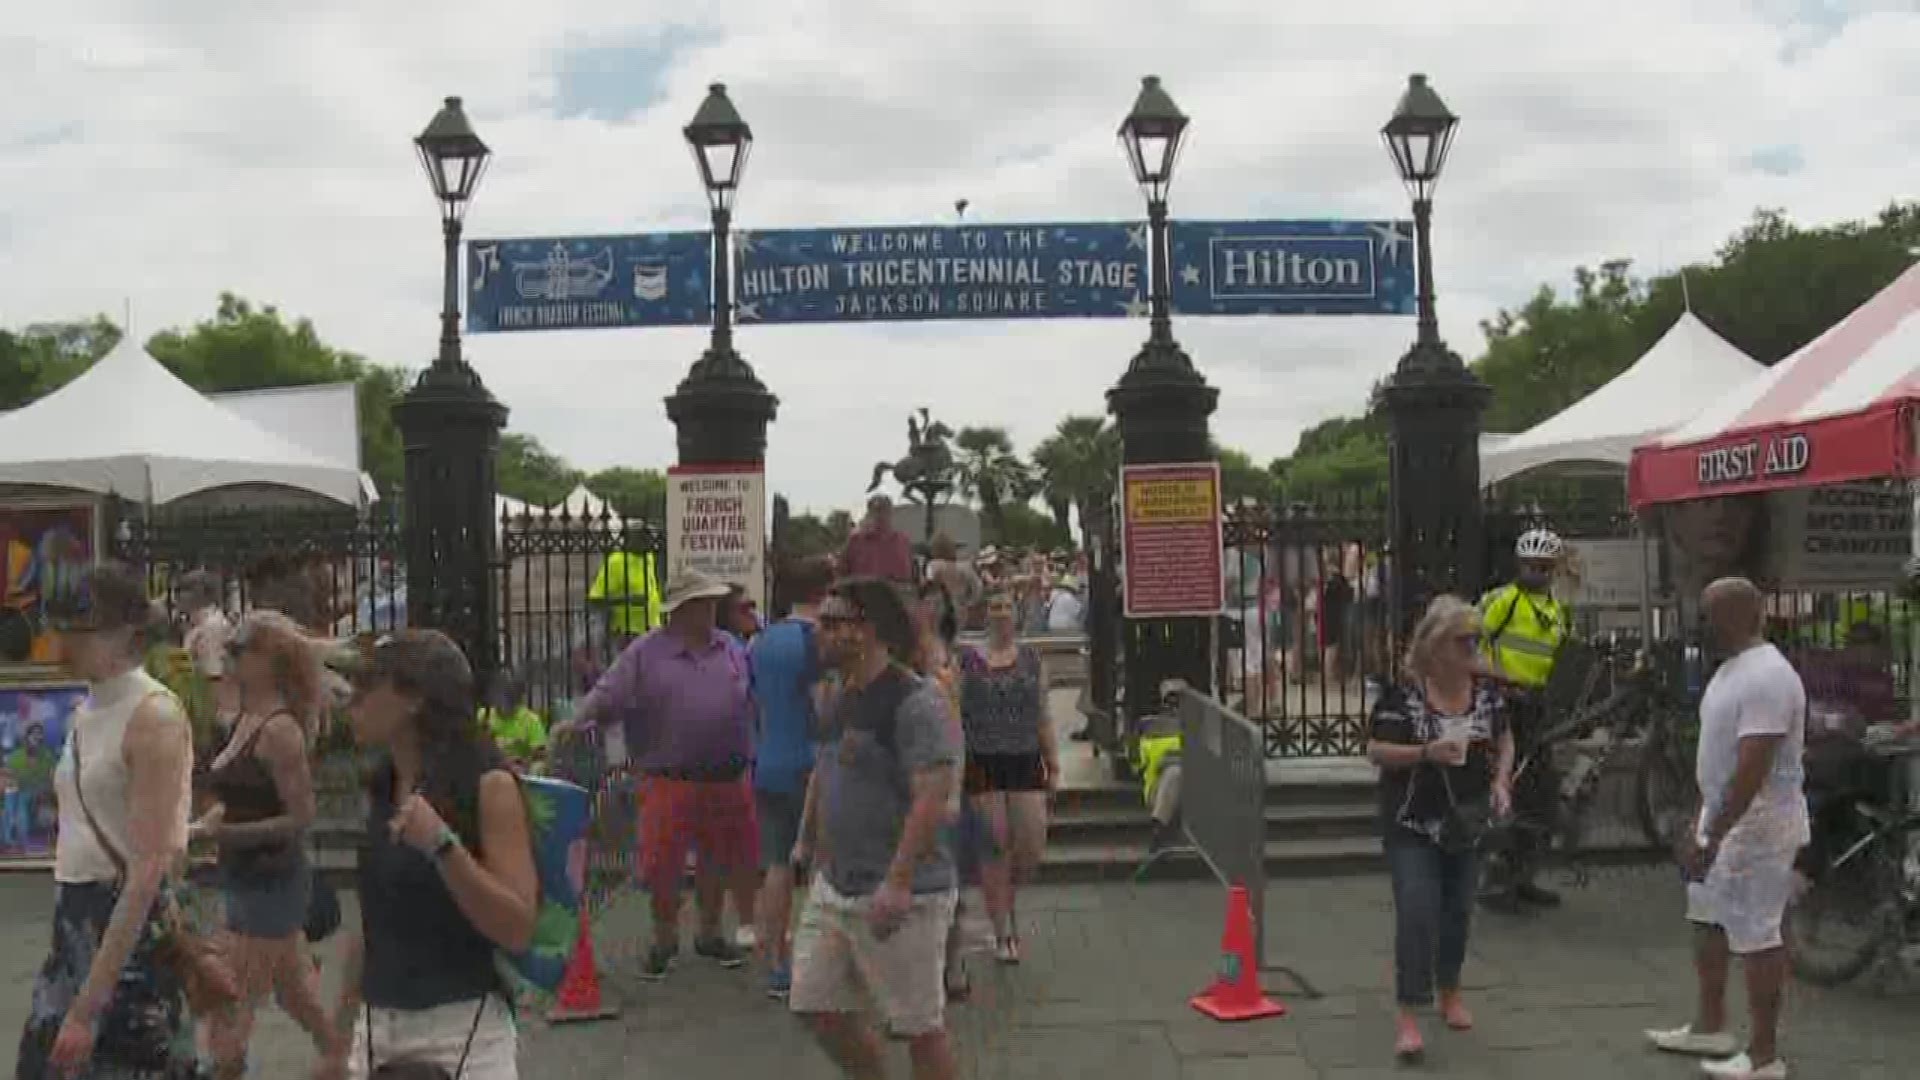 The incoming storm might put a damper on the 4-day festival, but you wouldn't know it looking at the crowds today.